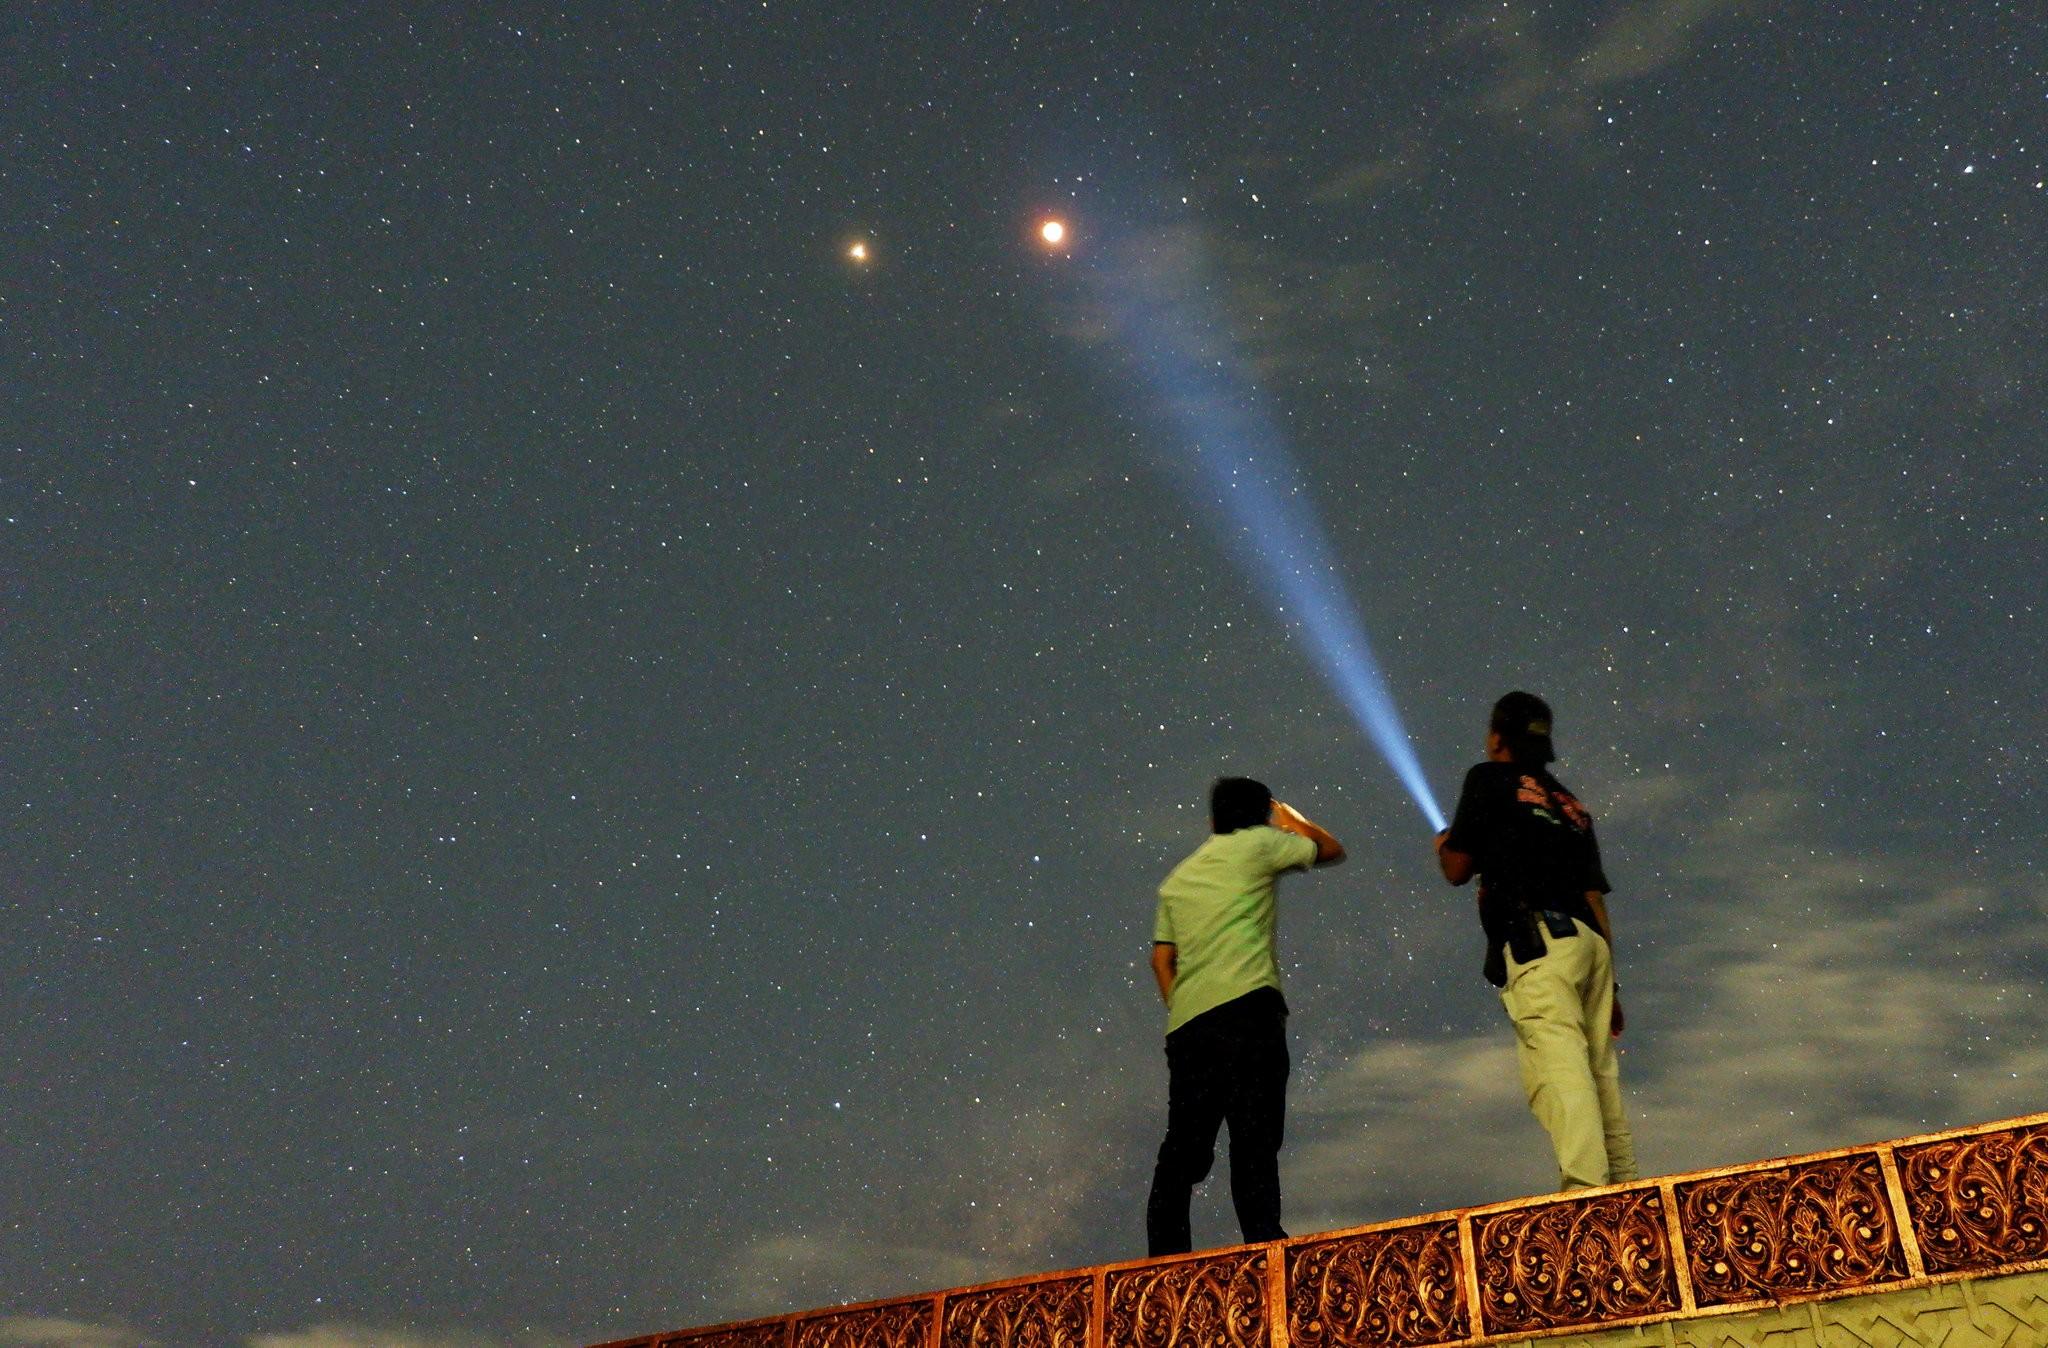 Two men looking up at July 2018's lunar eclipse, where Mars can be seen.